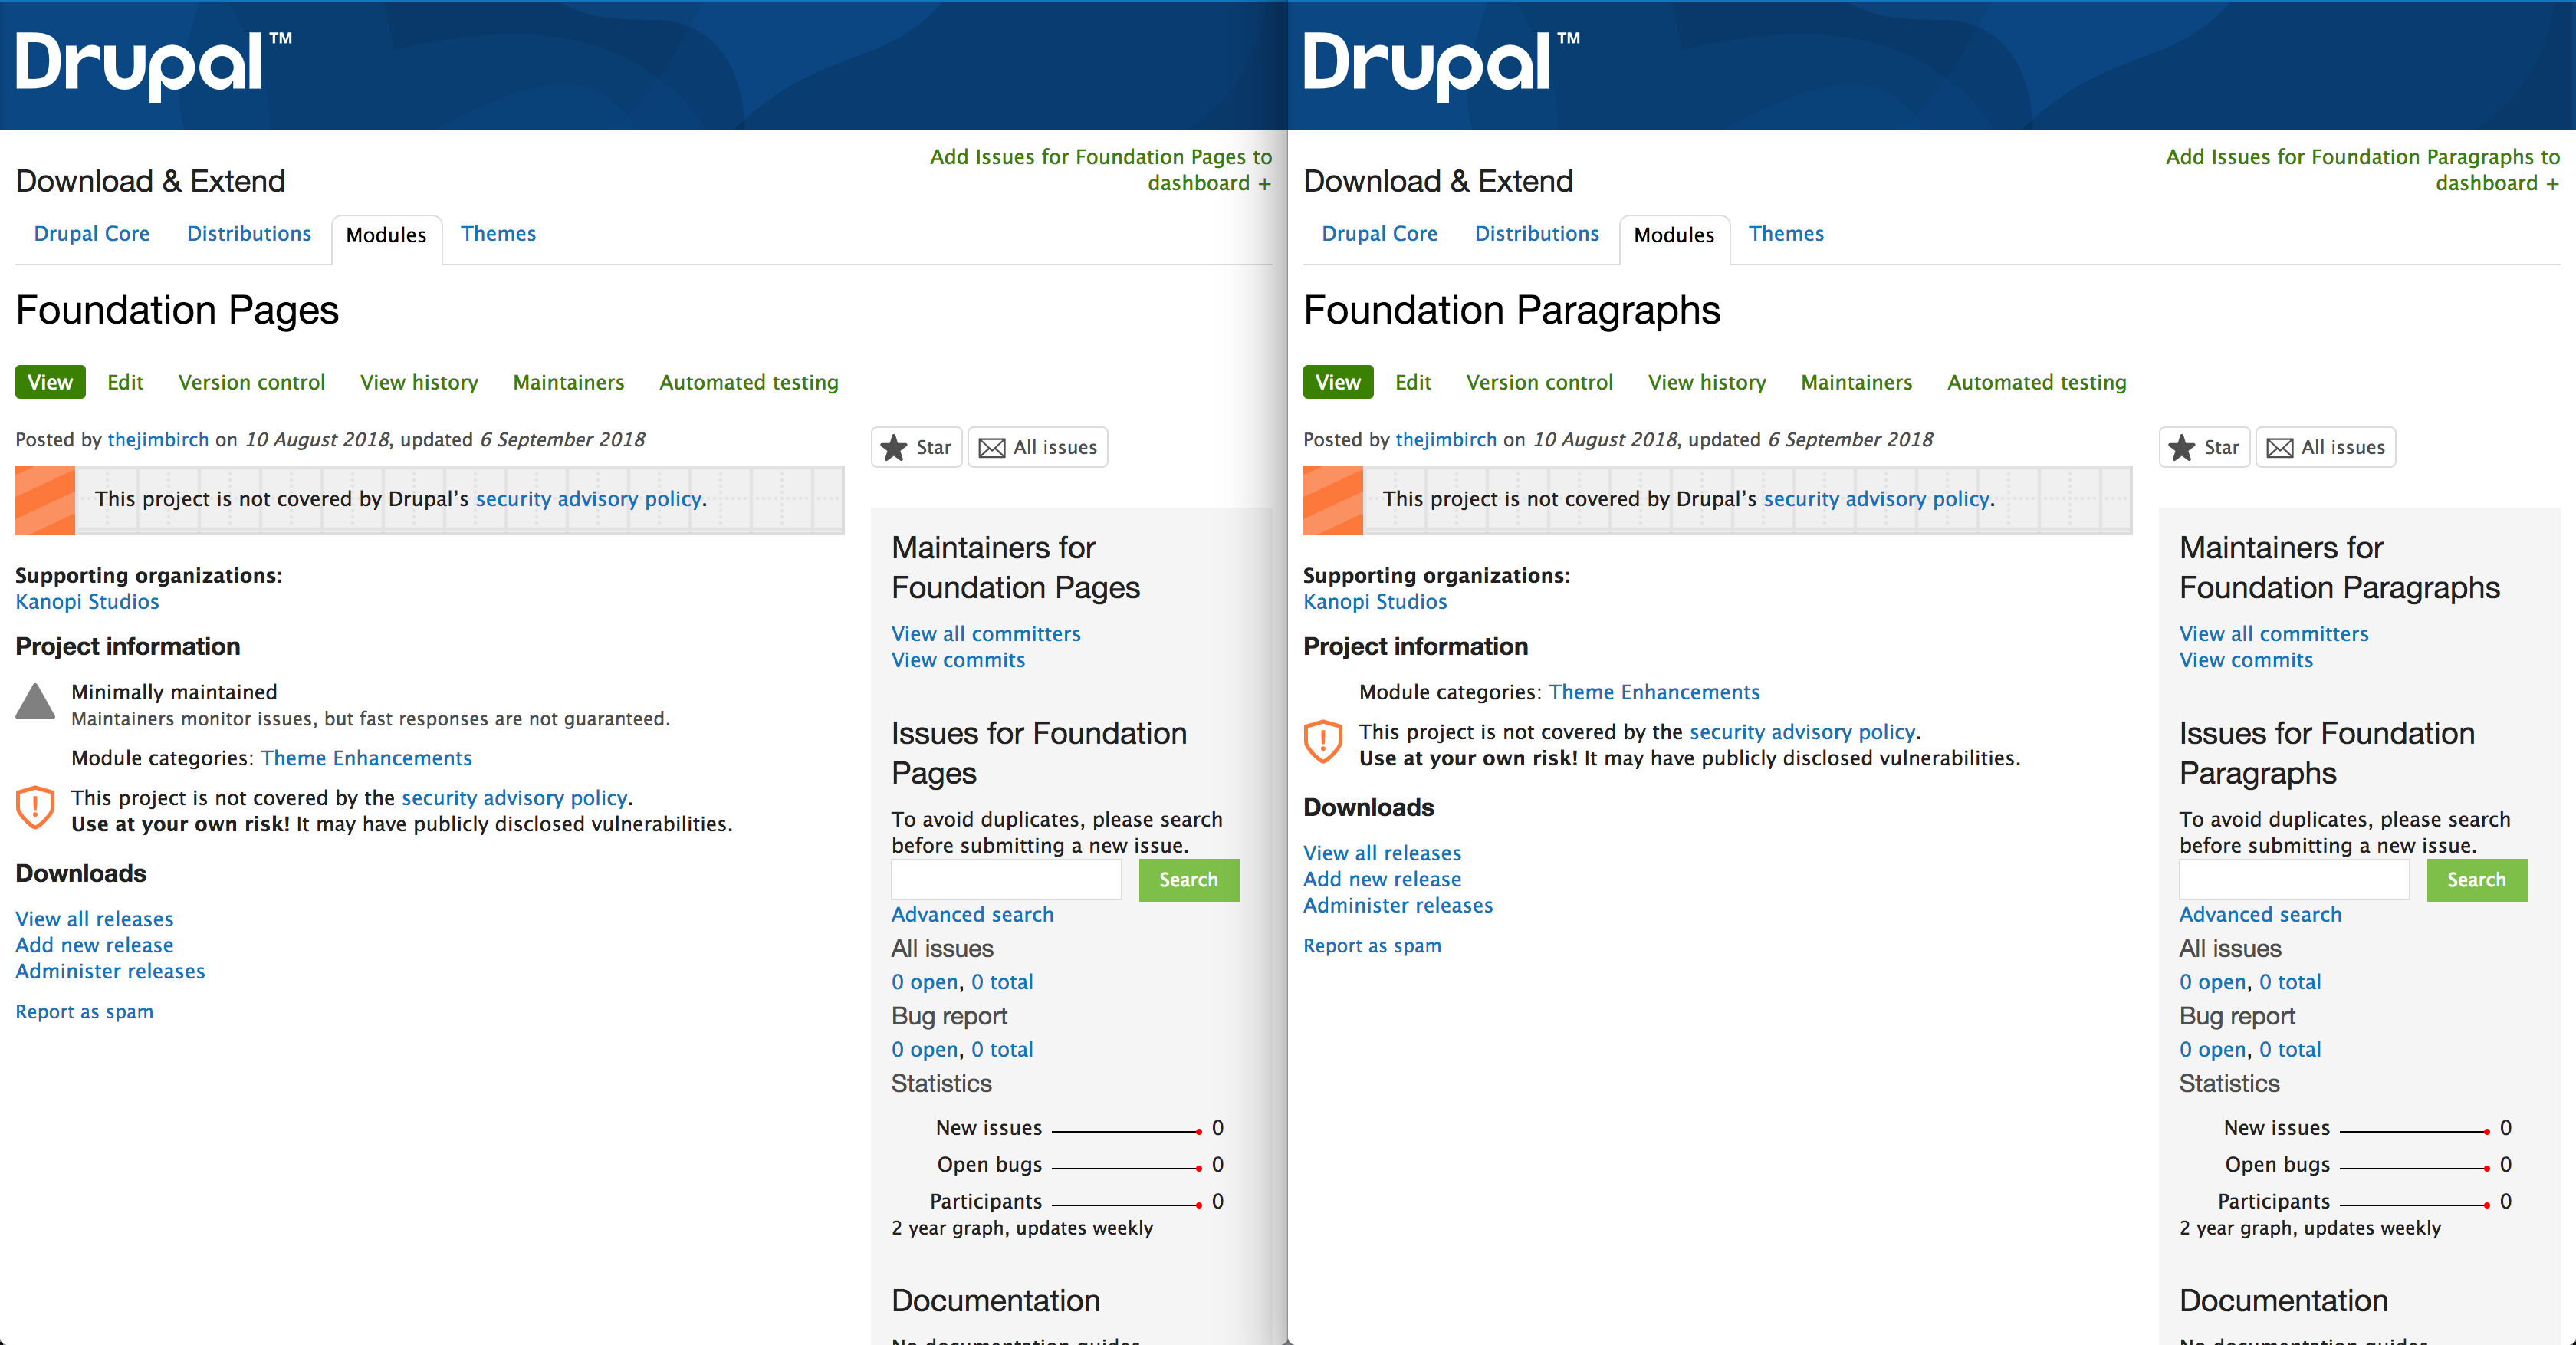 Foundation Paragraphs and Foundation Pages Drupal modules